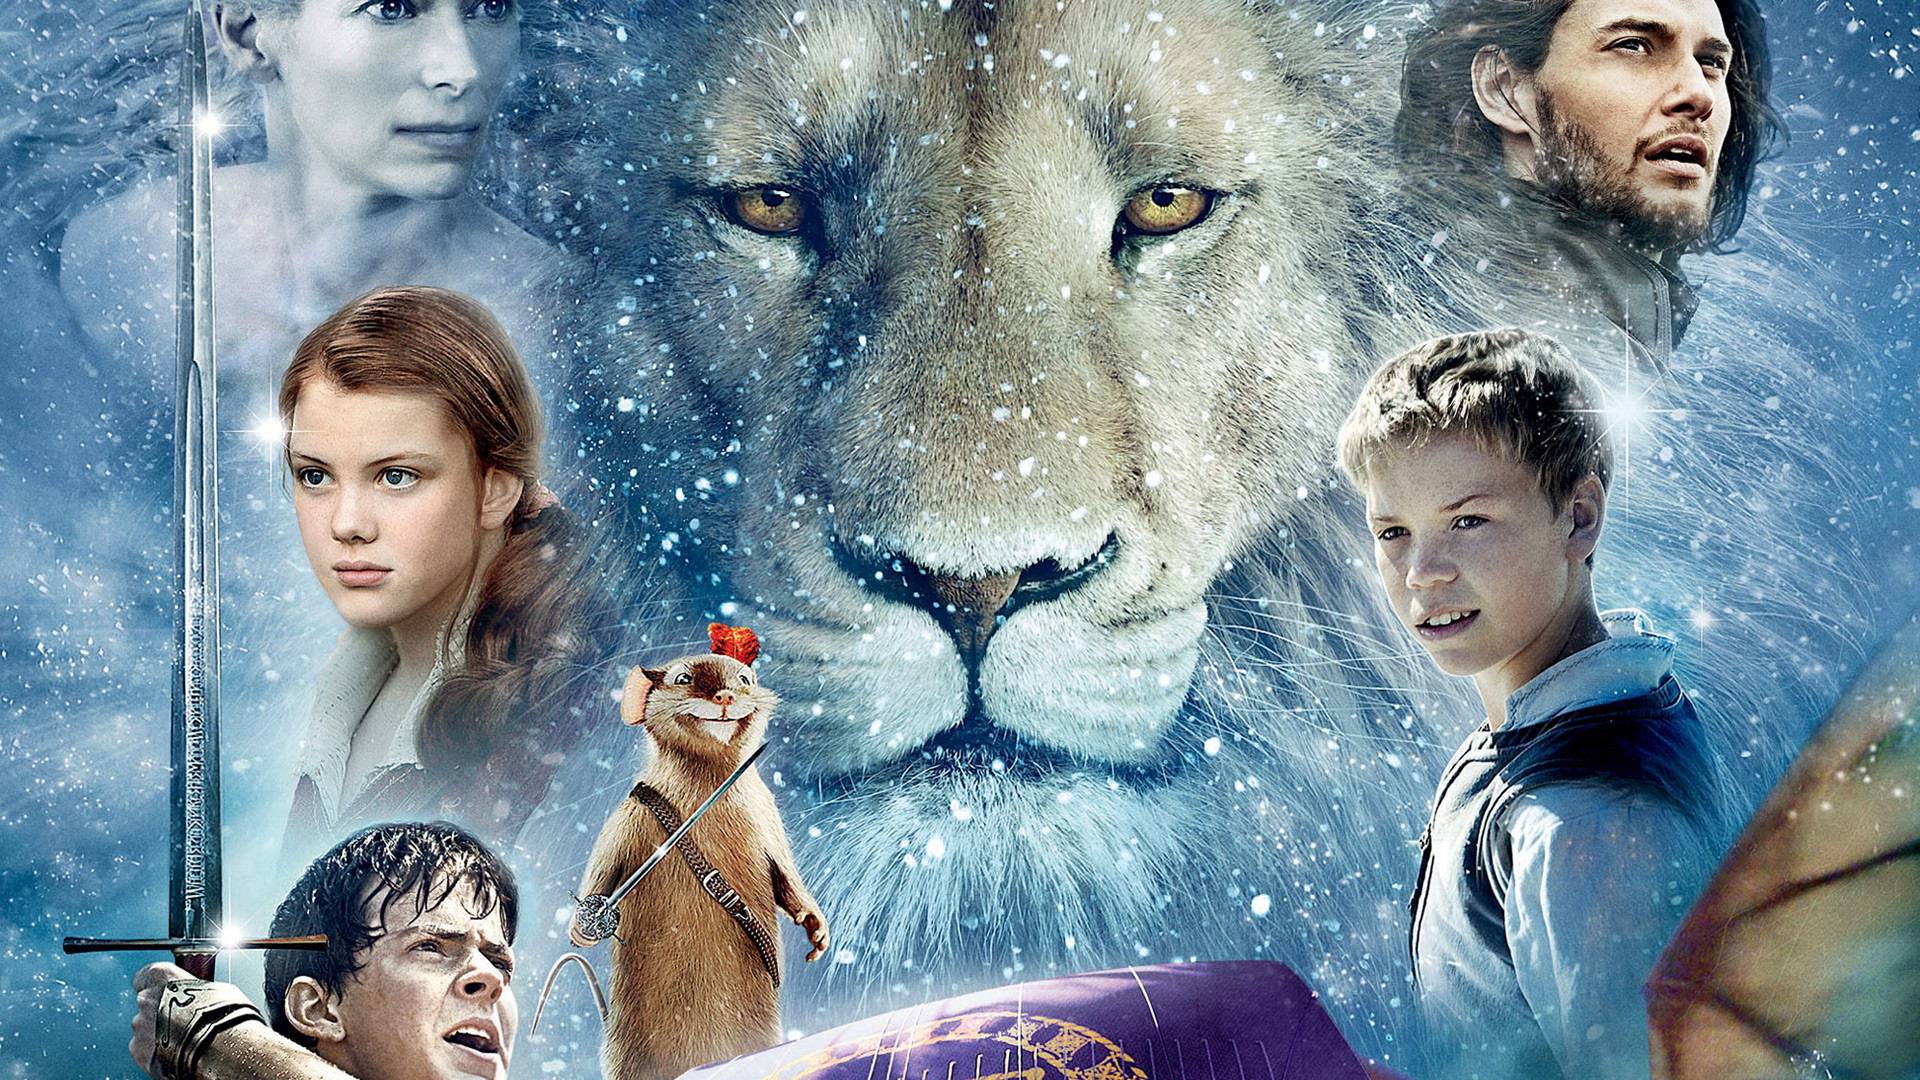 Narnia 3 1920x1080 Wallpapers, 1920x1080 Wallpapers & Pictures